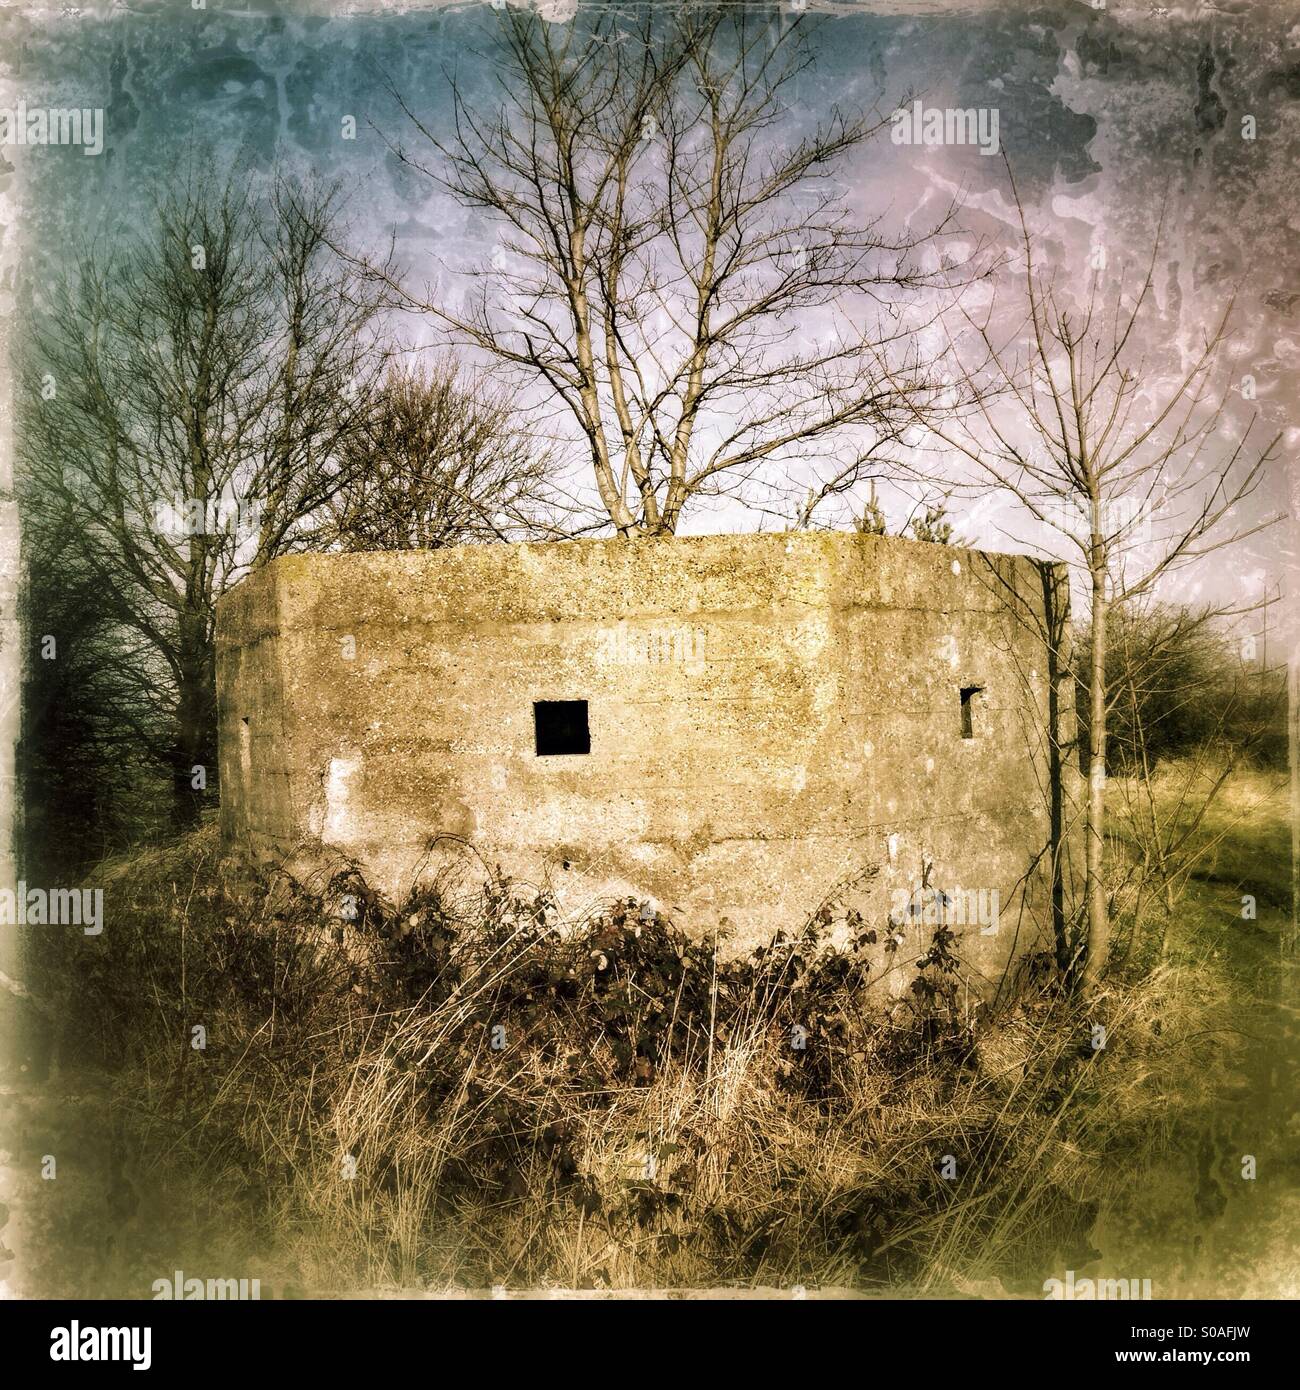 Pillbox on the perimeter of the disused WW2 airfield of RAF Wellingore, Lincolnshire, England. Stock Photo